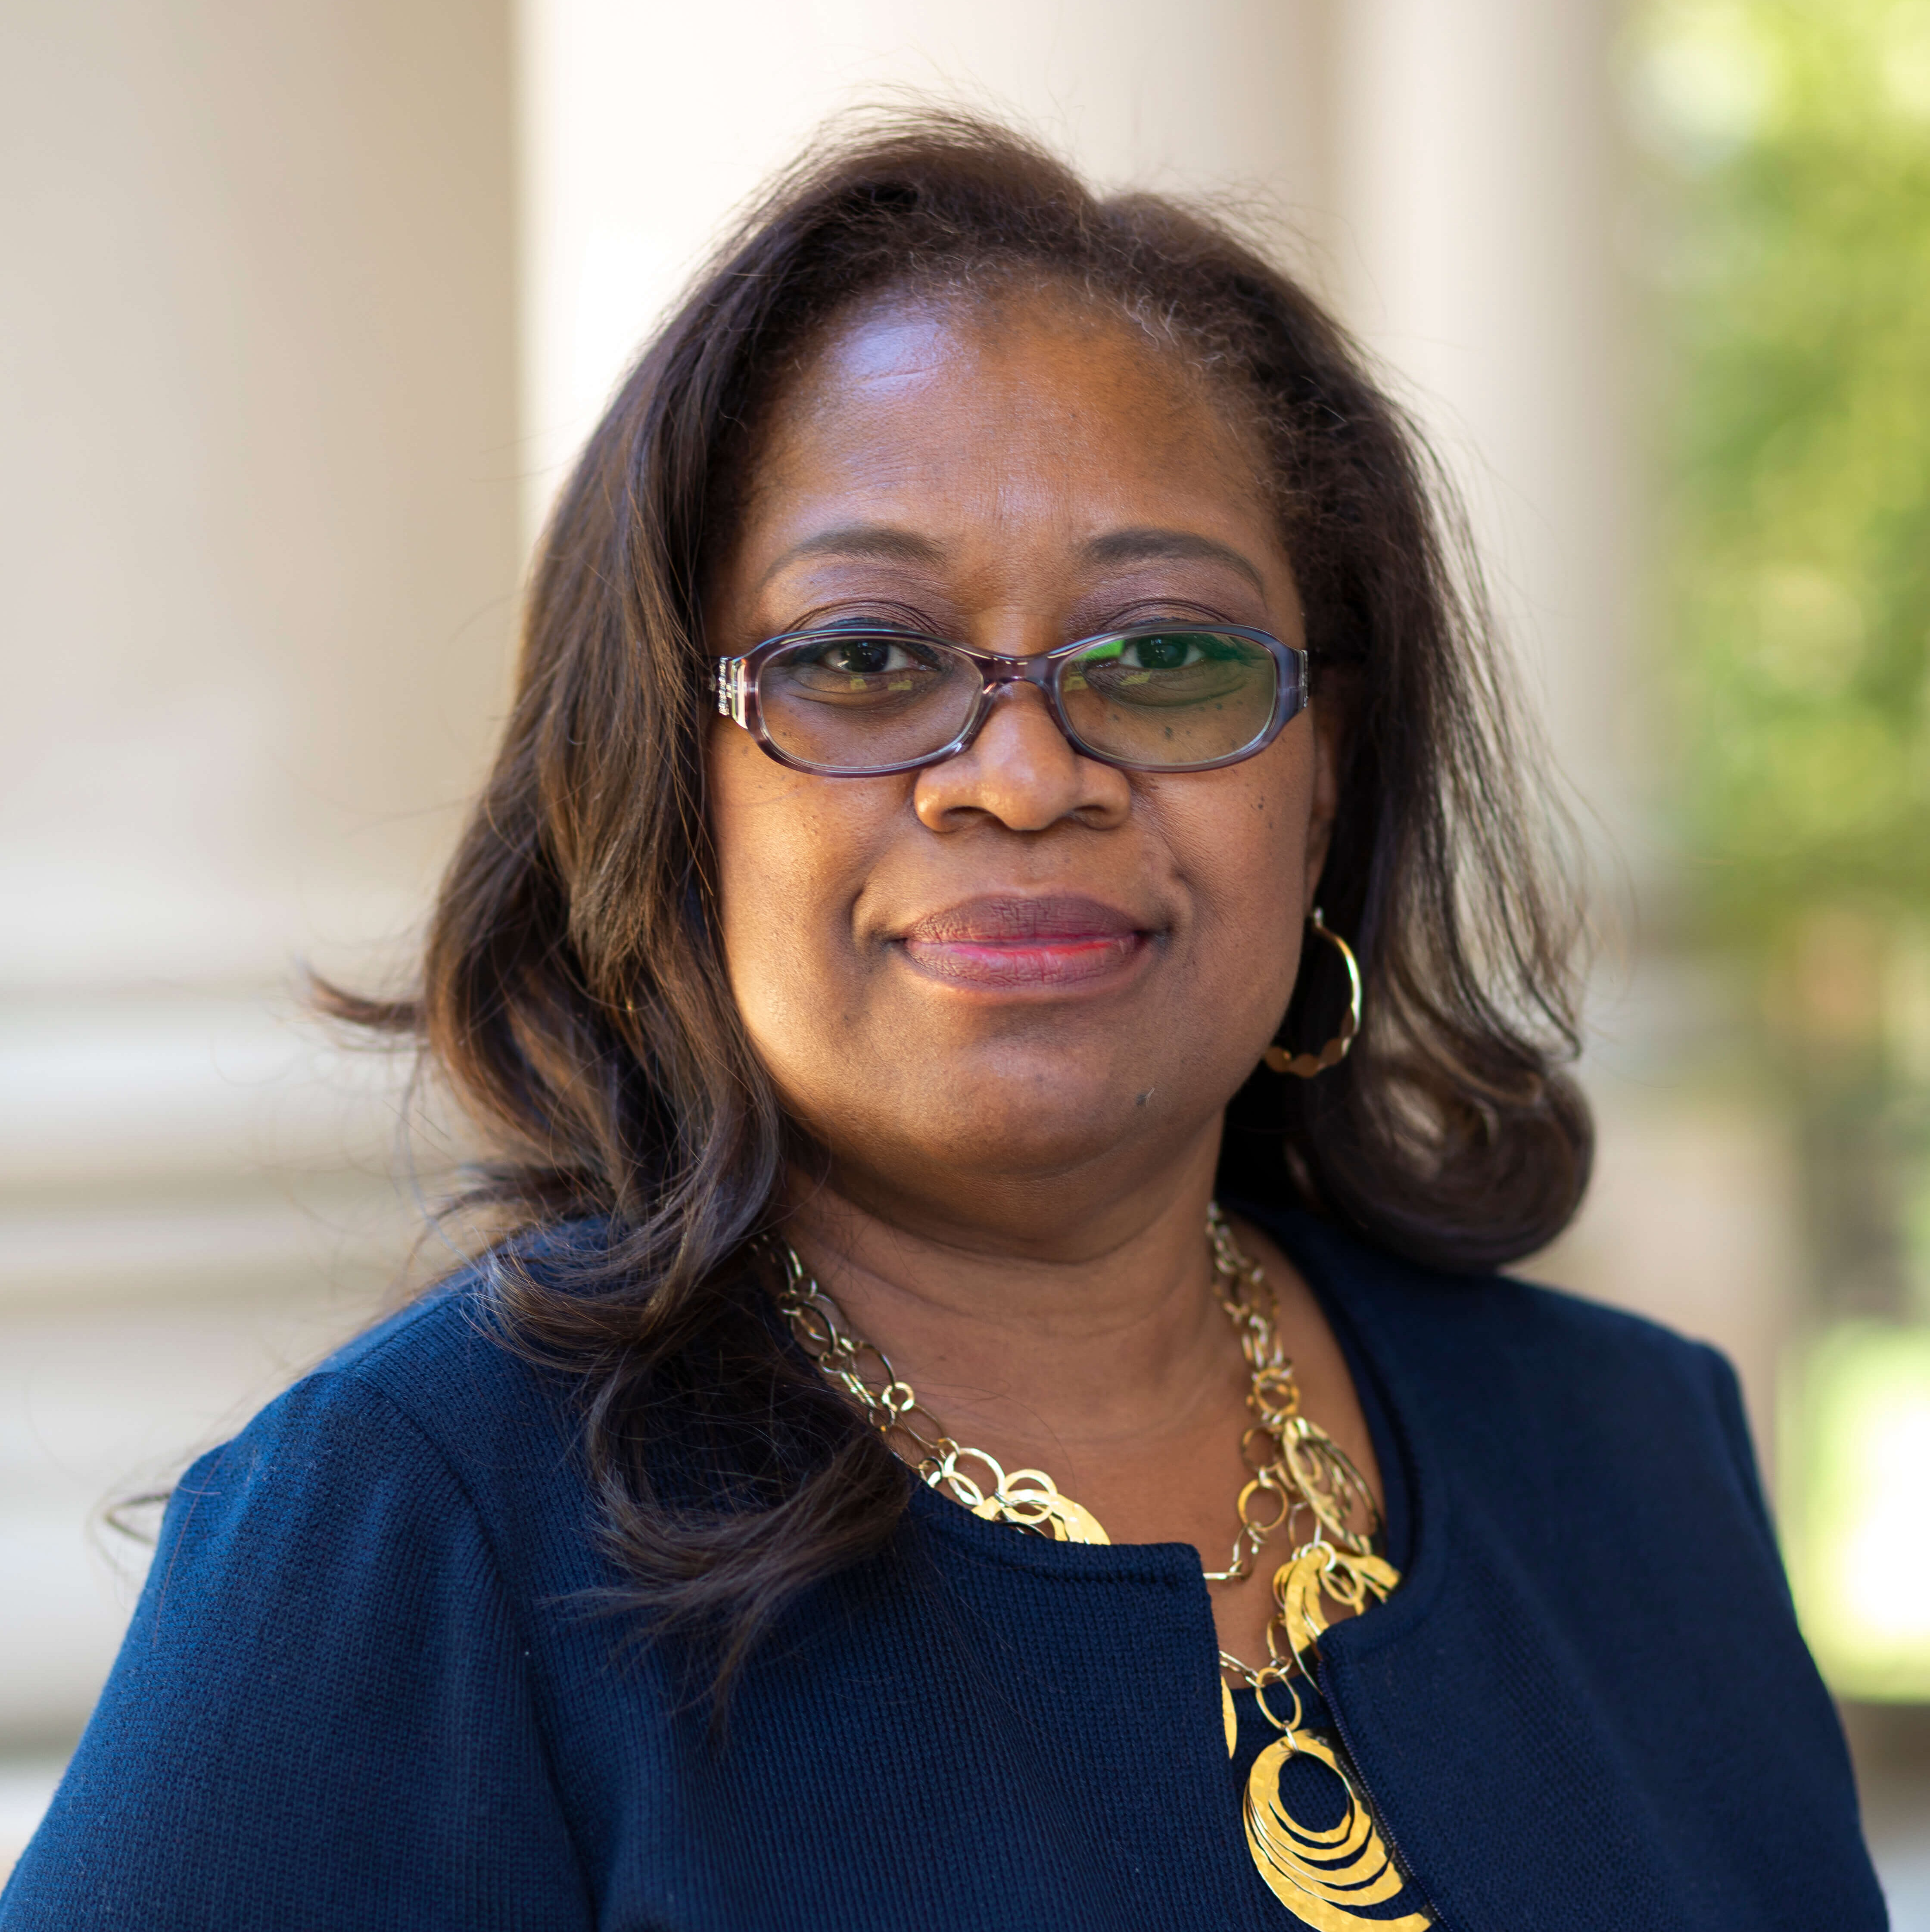 Provost Scott-Johnson Elected to YMCA Board of Directors